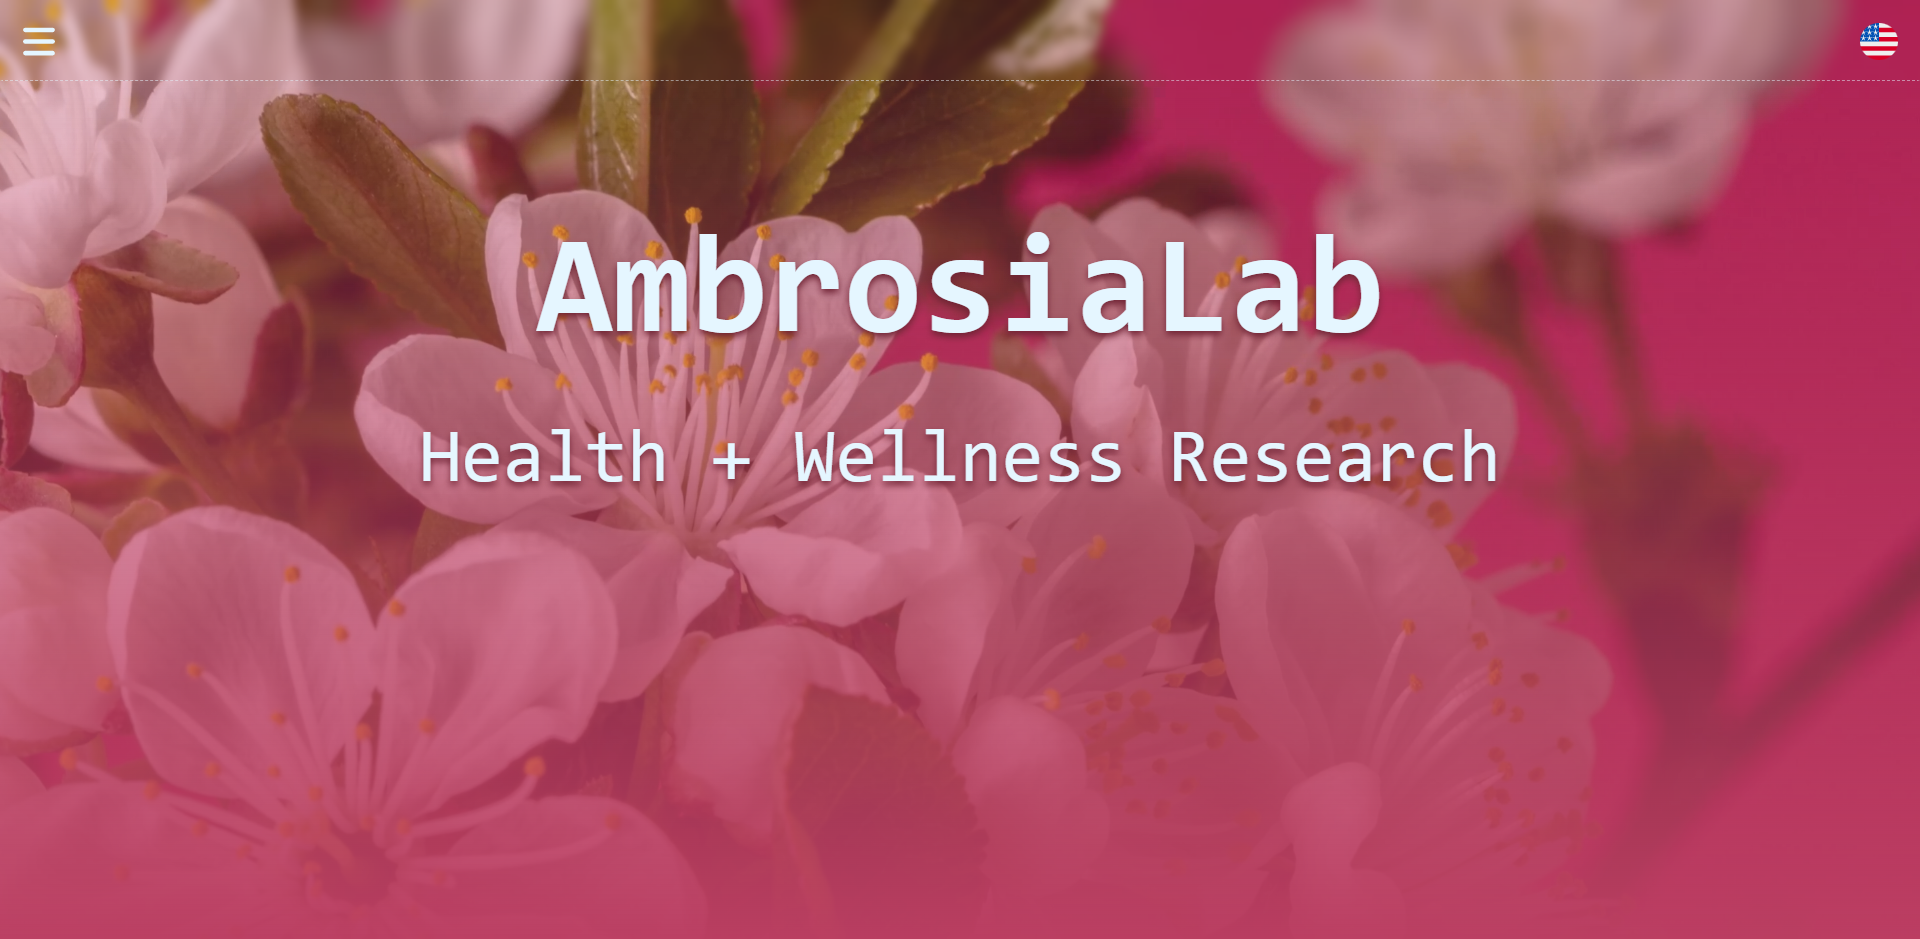 A photo of AmbrosiaLab